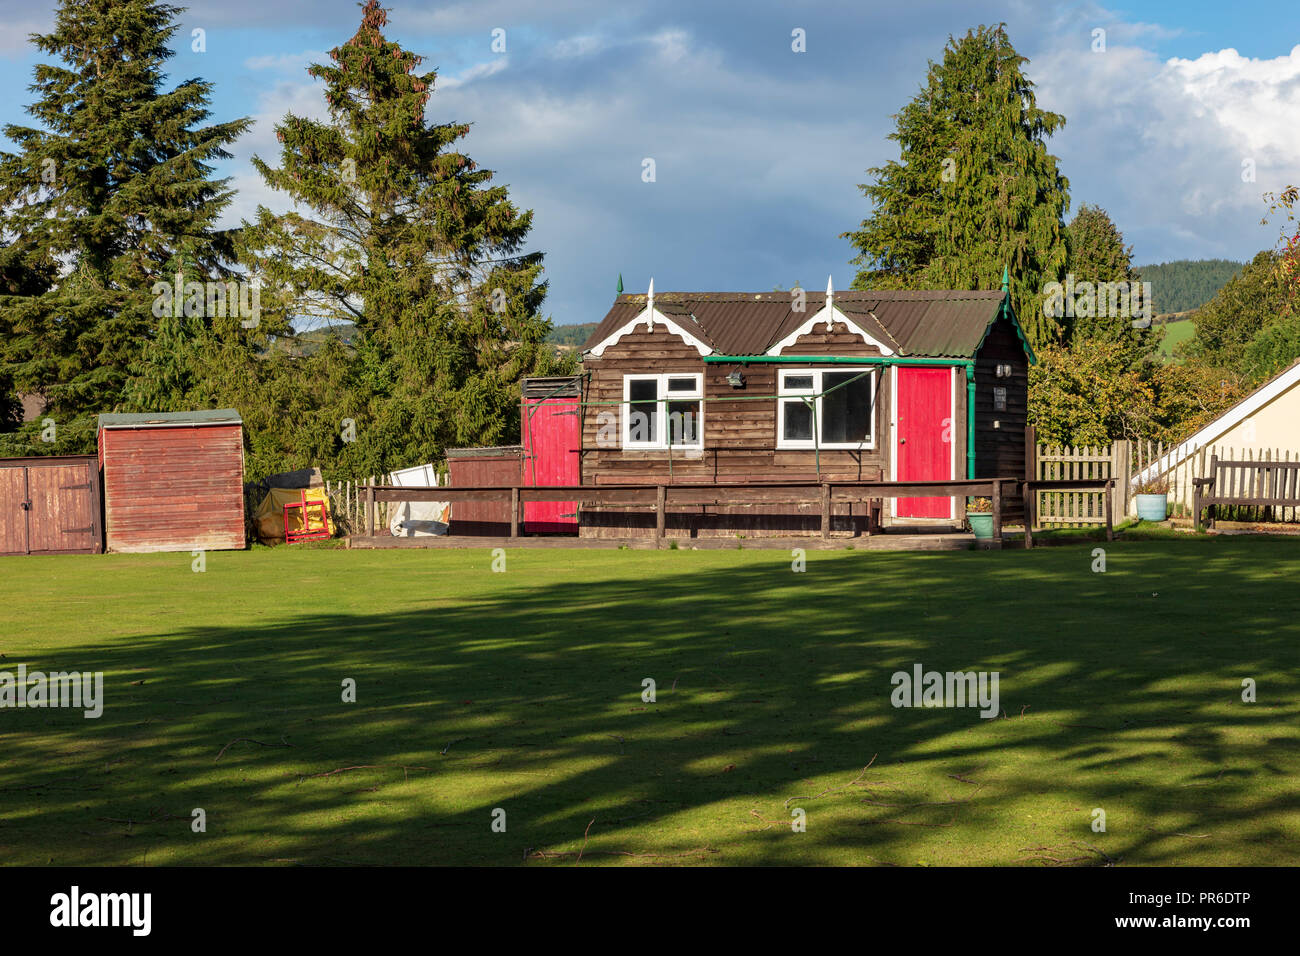 Clun village Bowling Club with wooden club house, on the outskirts of the pretty village, Clun, Shropshire, UK Stock Photo